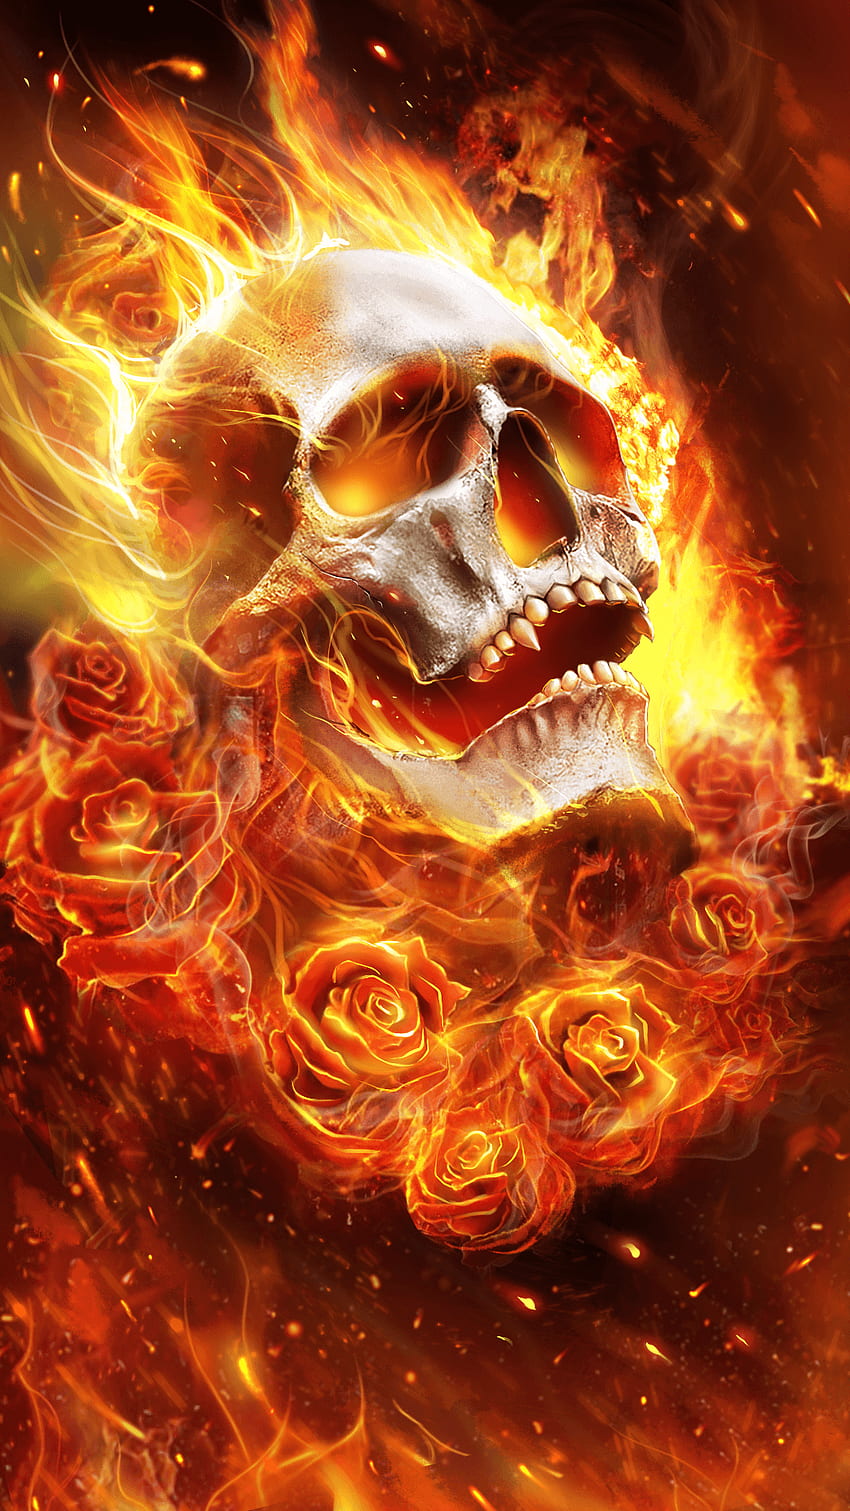 5246 Tattoo Skull Flame Images Stock Photos  Vectors  Shutterstock